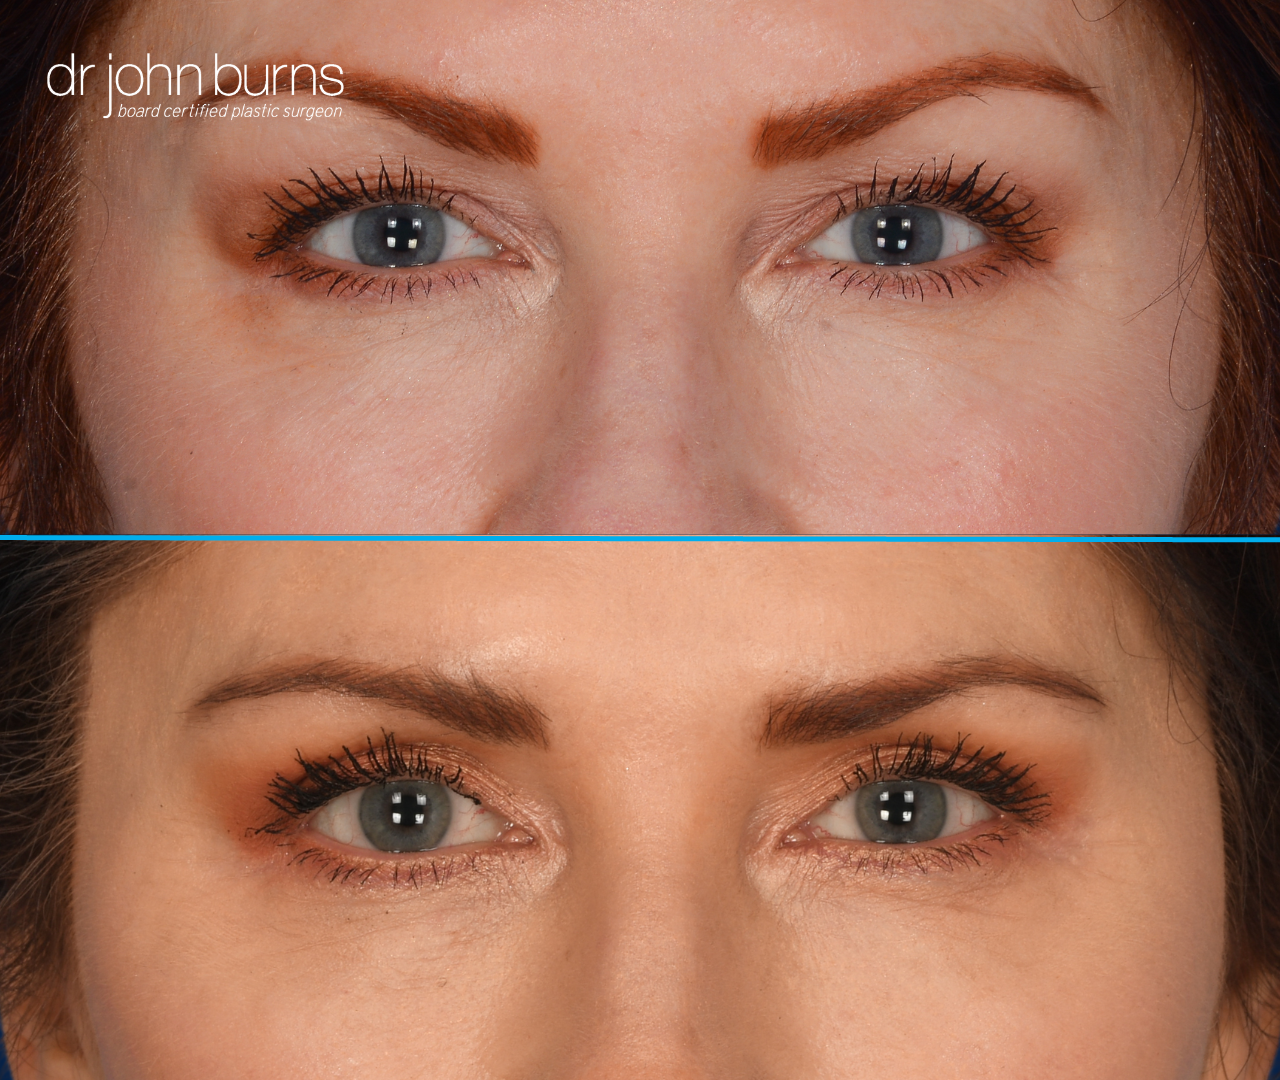 Upper eyelid before and after by Dr. John Burns